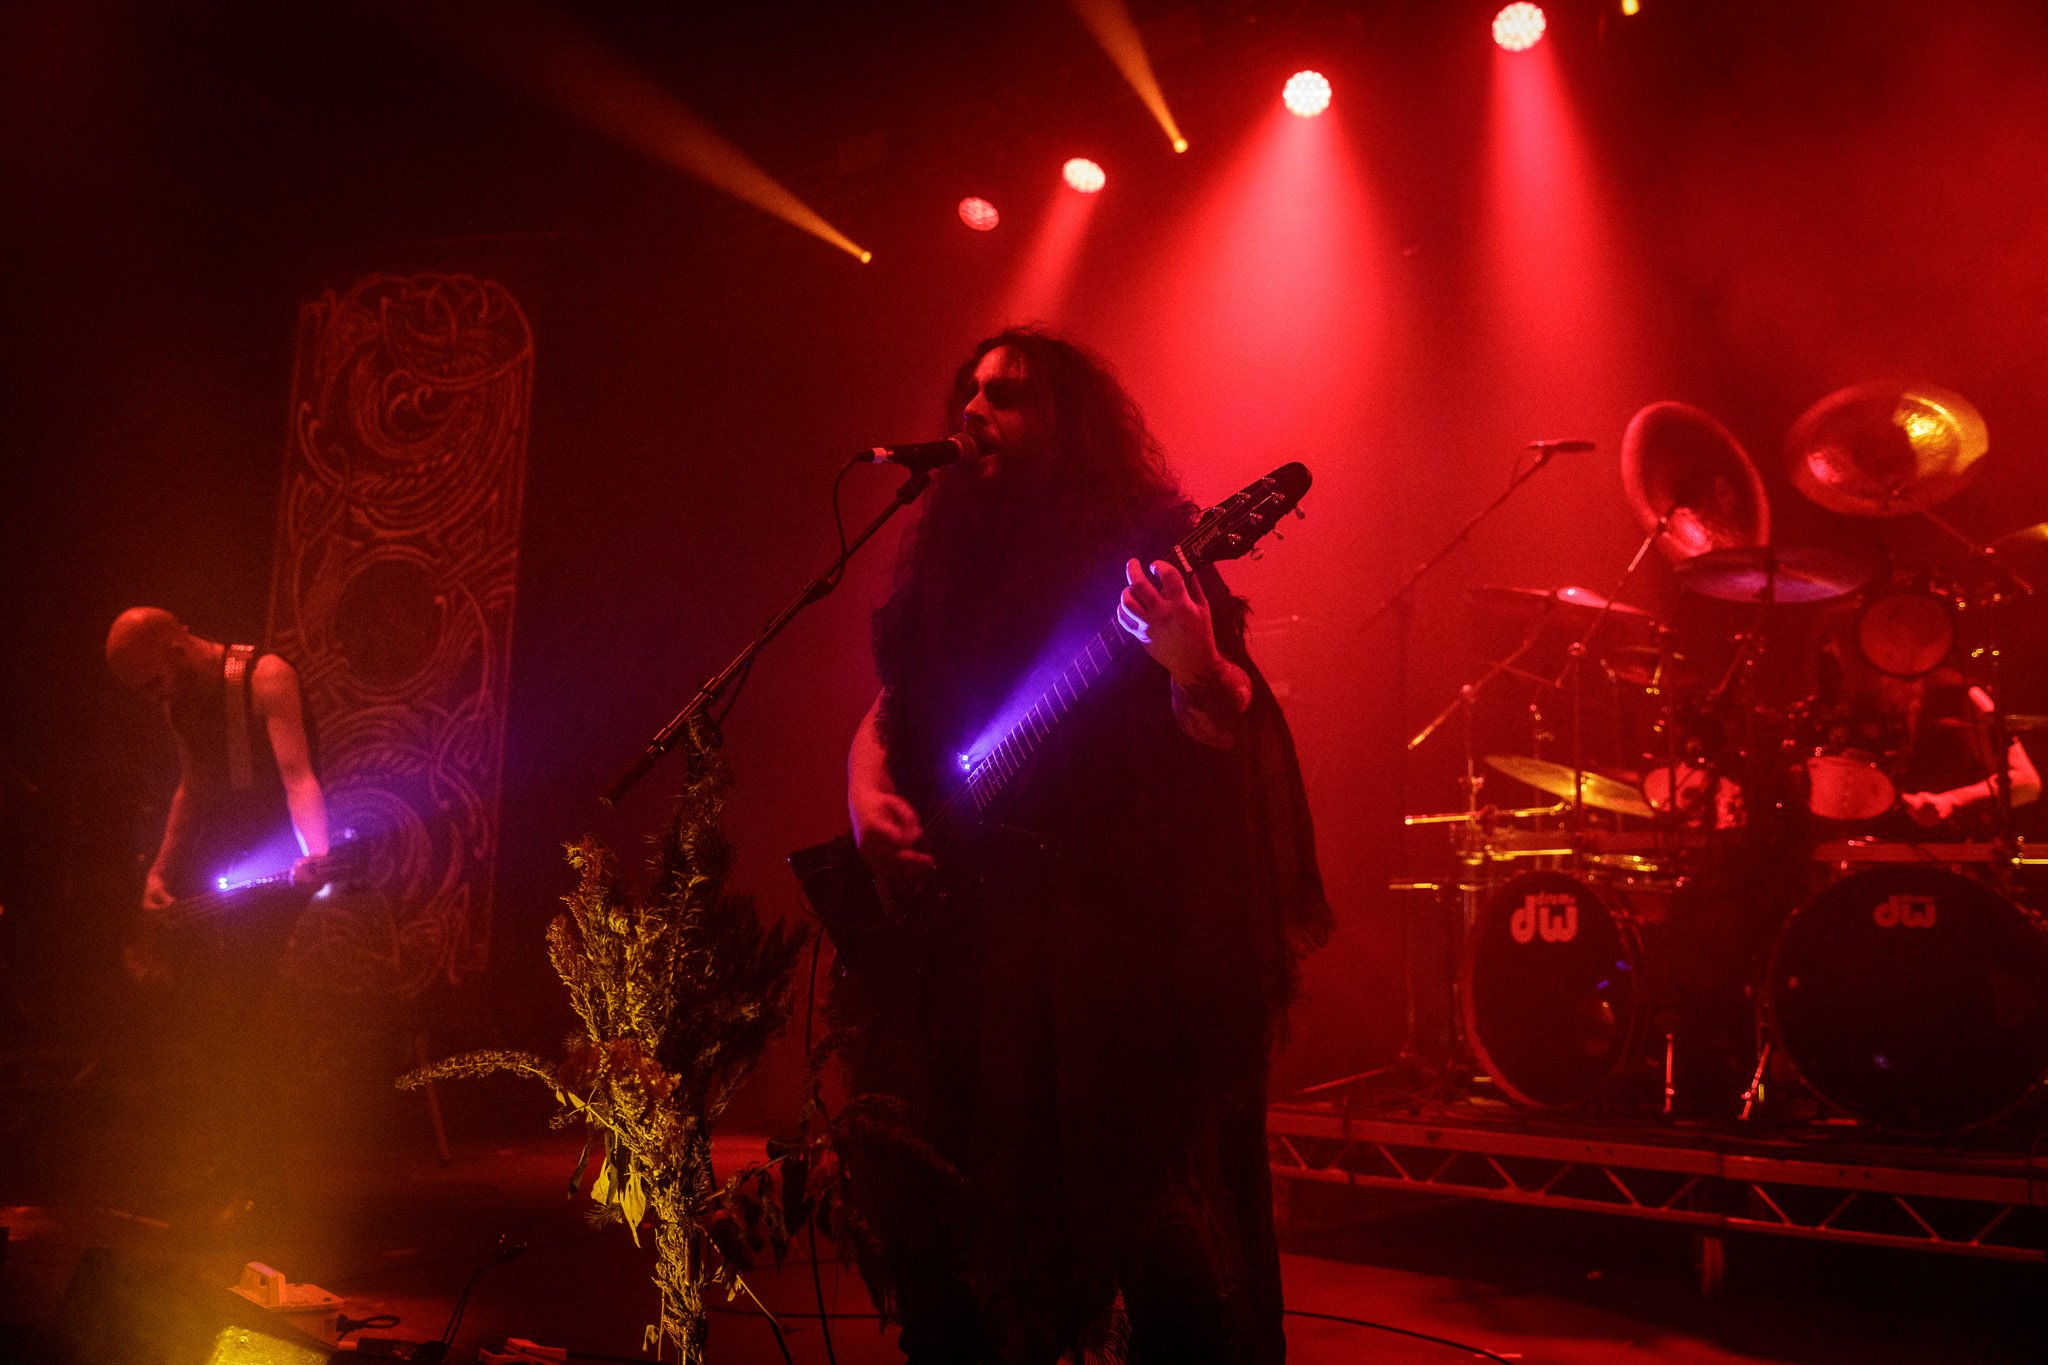 Wolves In The Throne Room at the Damnation Festival in Mancheste